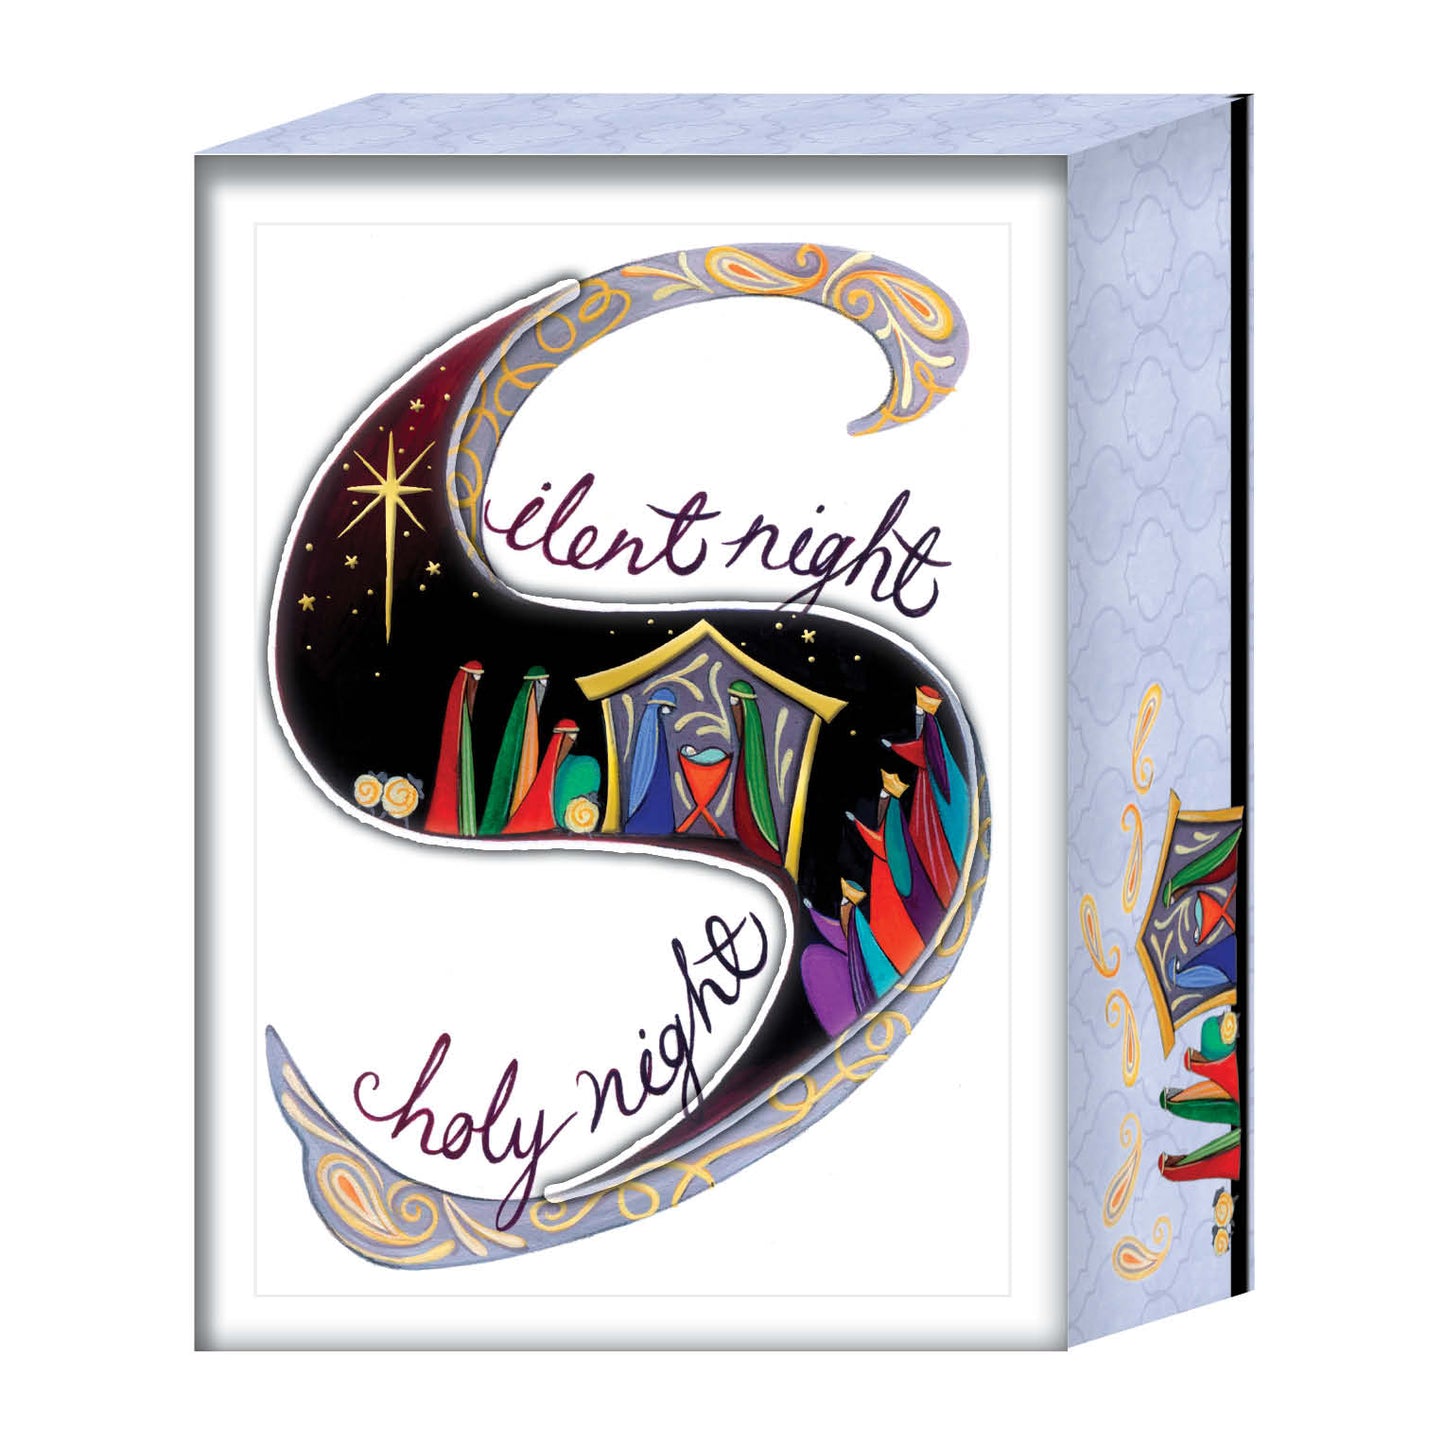 Silent Night - Boxed Christmas Cards - 15 Cards